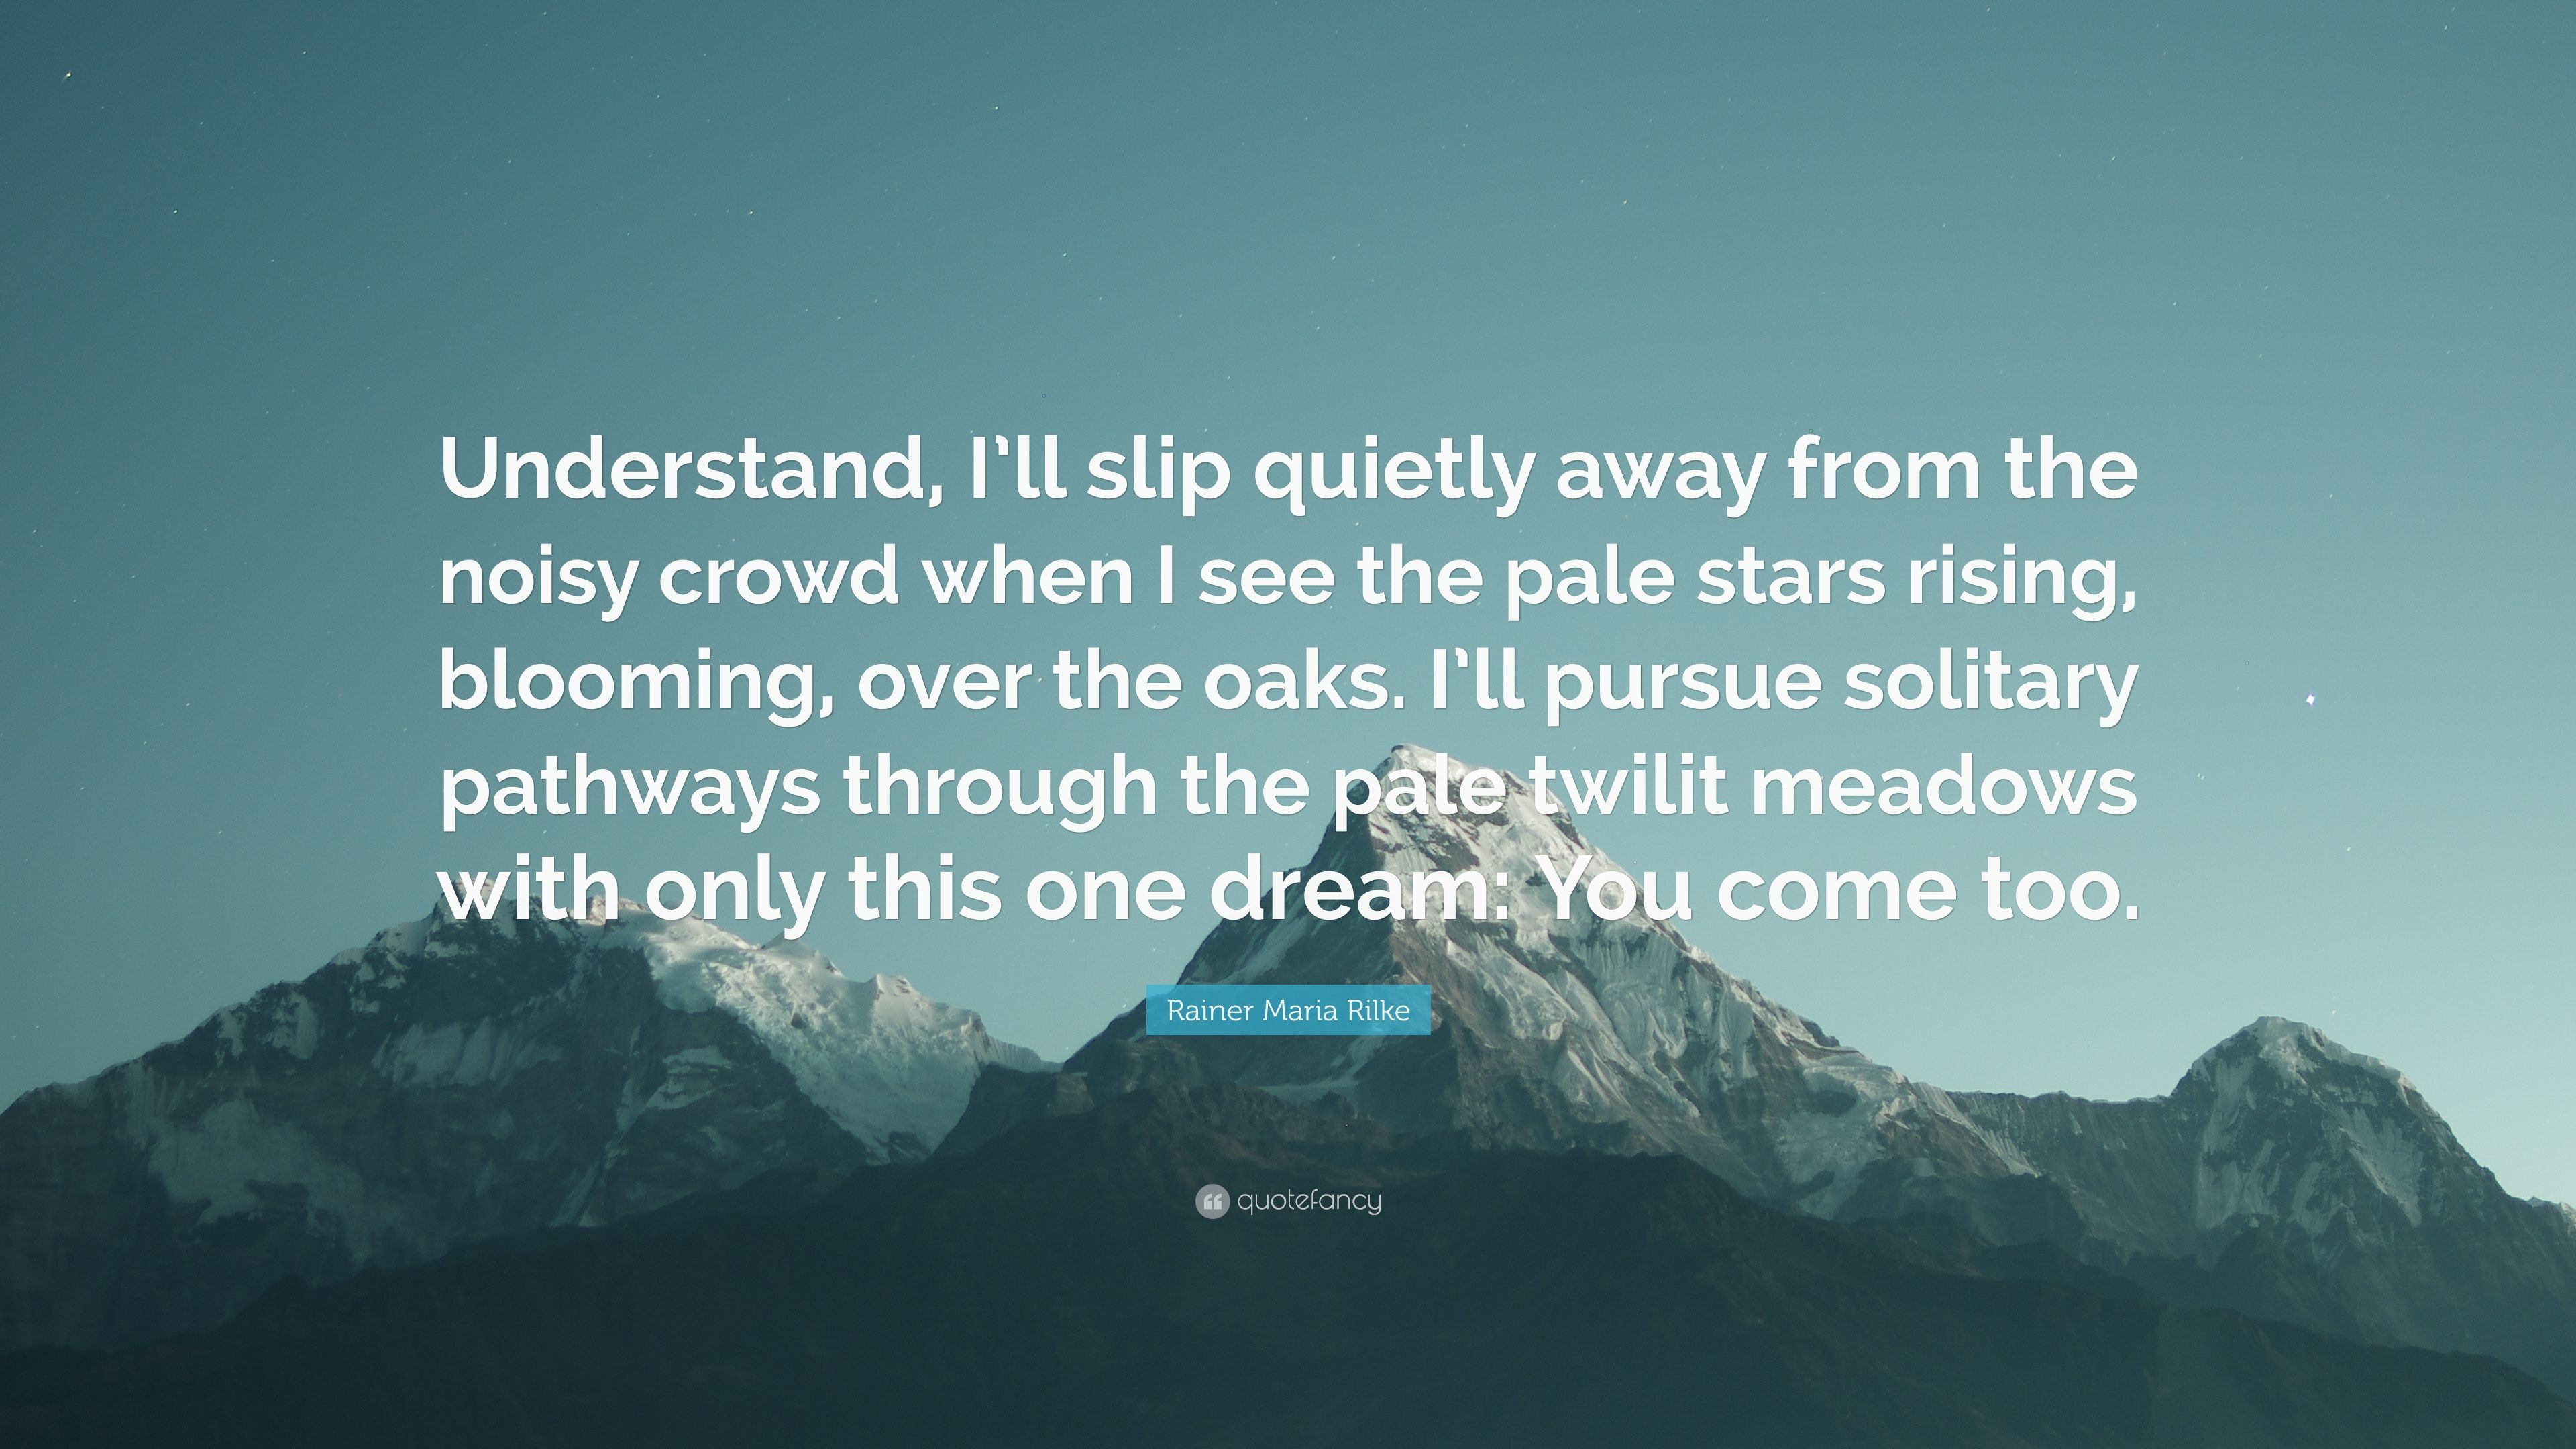 3840x2160 Rainer Maria Rilke Quote: “Understand, I'll slip quietly away from the